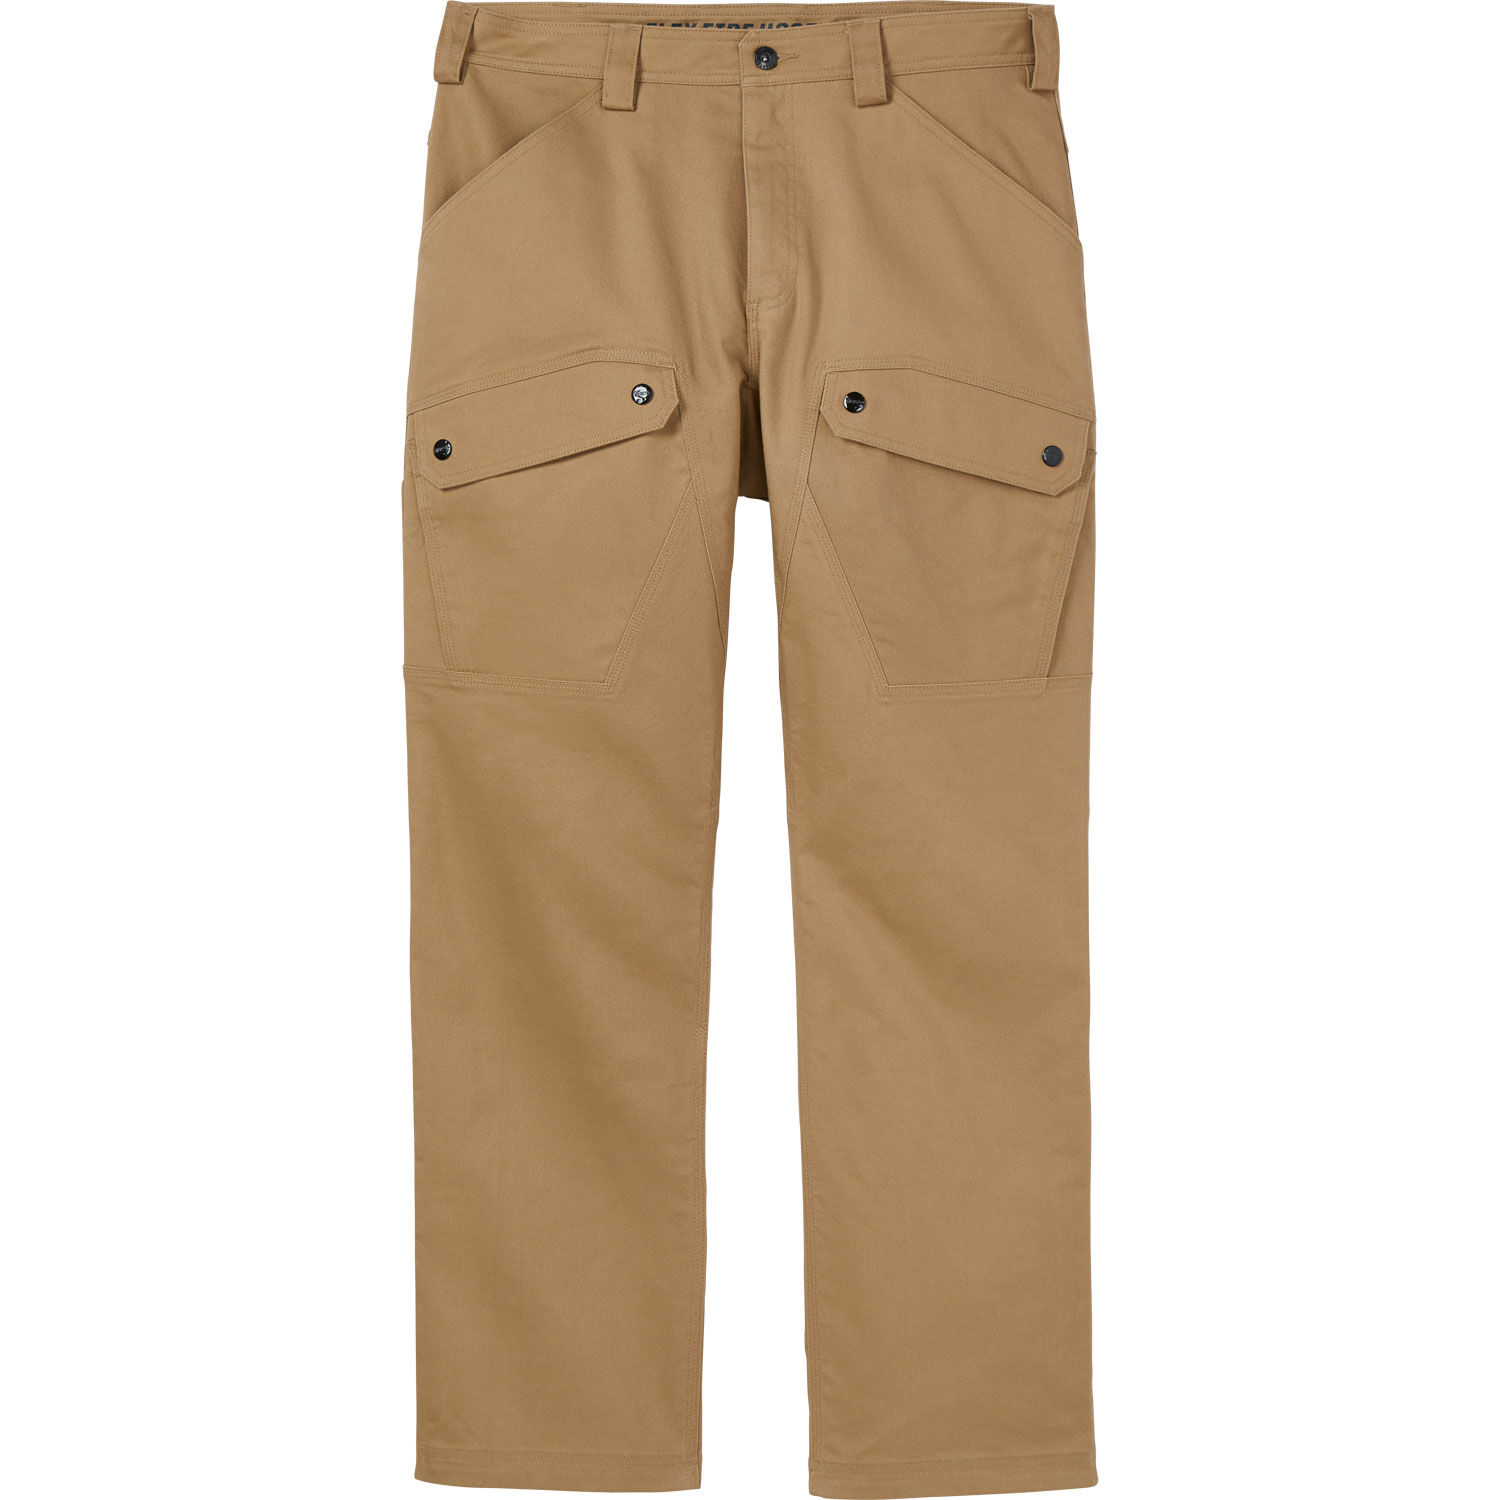 Men's Solid Color Slim Fit Cargo Pants Classic Full Length Cotton Chino  Trousers | eBay